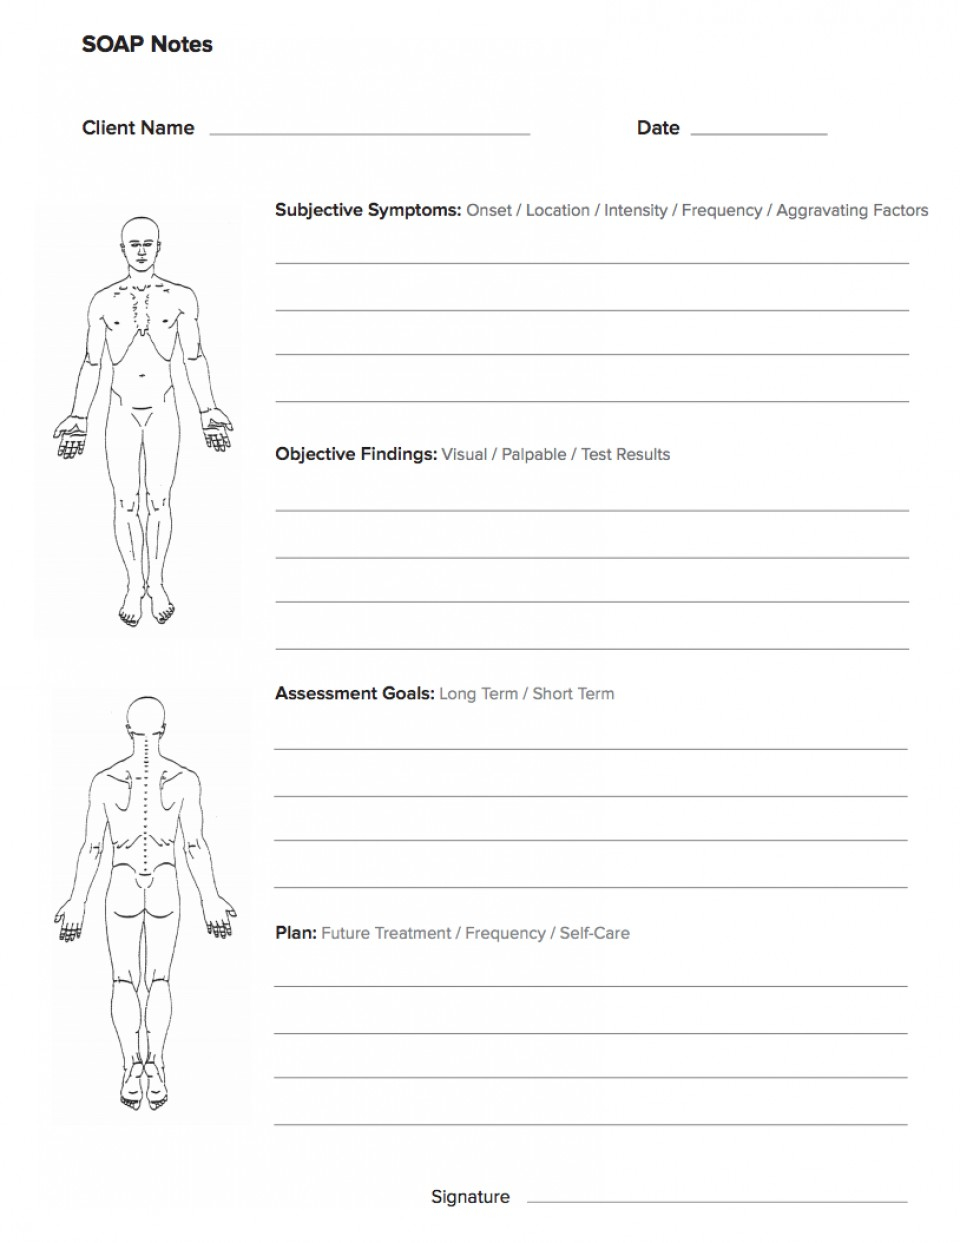 010 Template Ideas Massagebook Free Massage Soap Notes Forms Pertaining To Free Soap Notes For Massage Therapy Templates